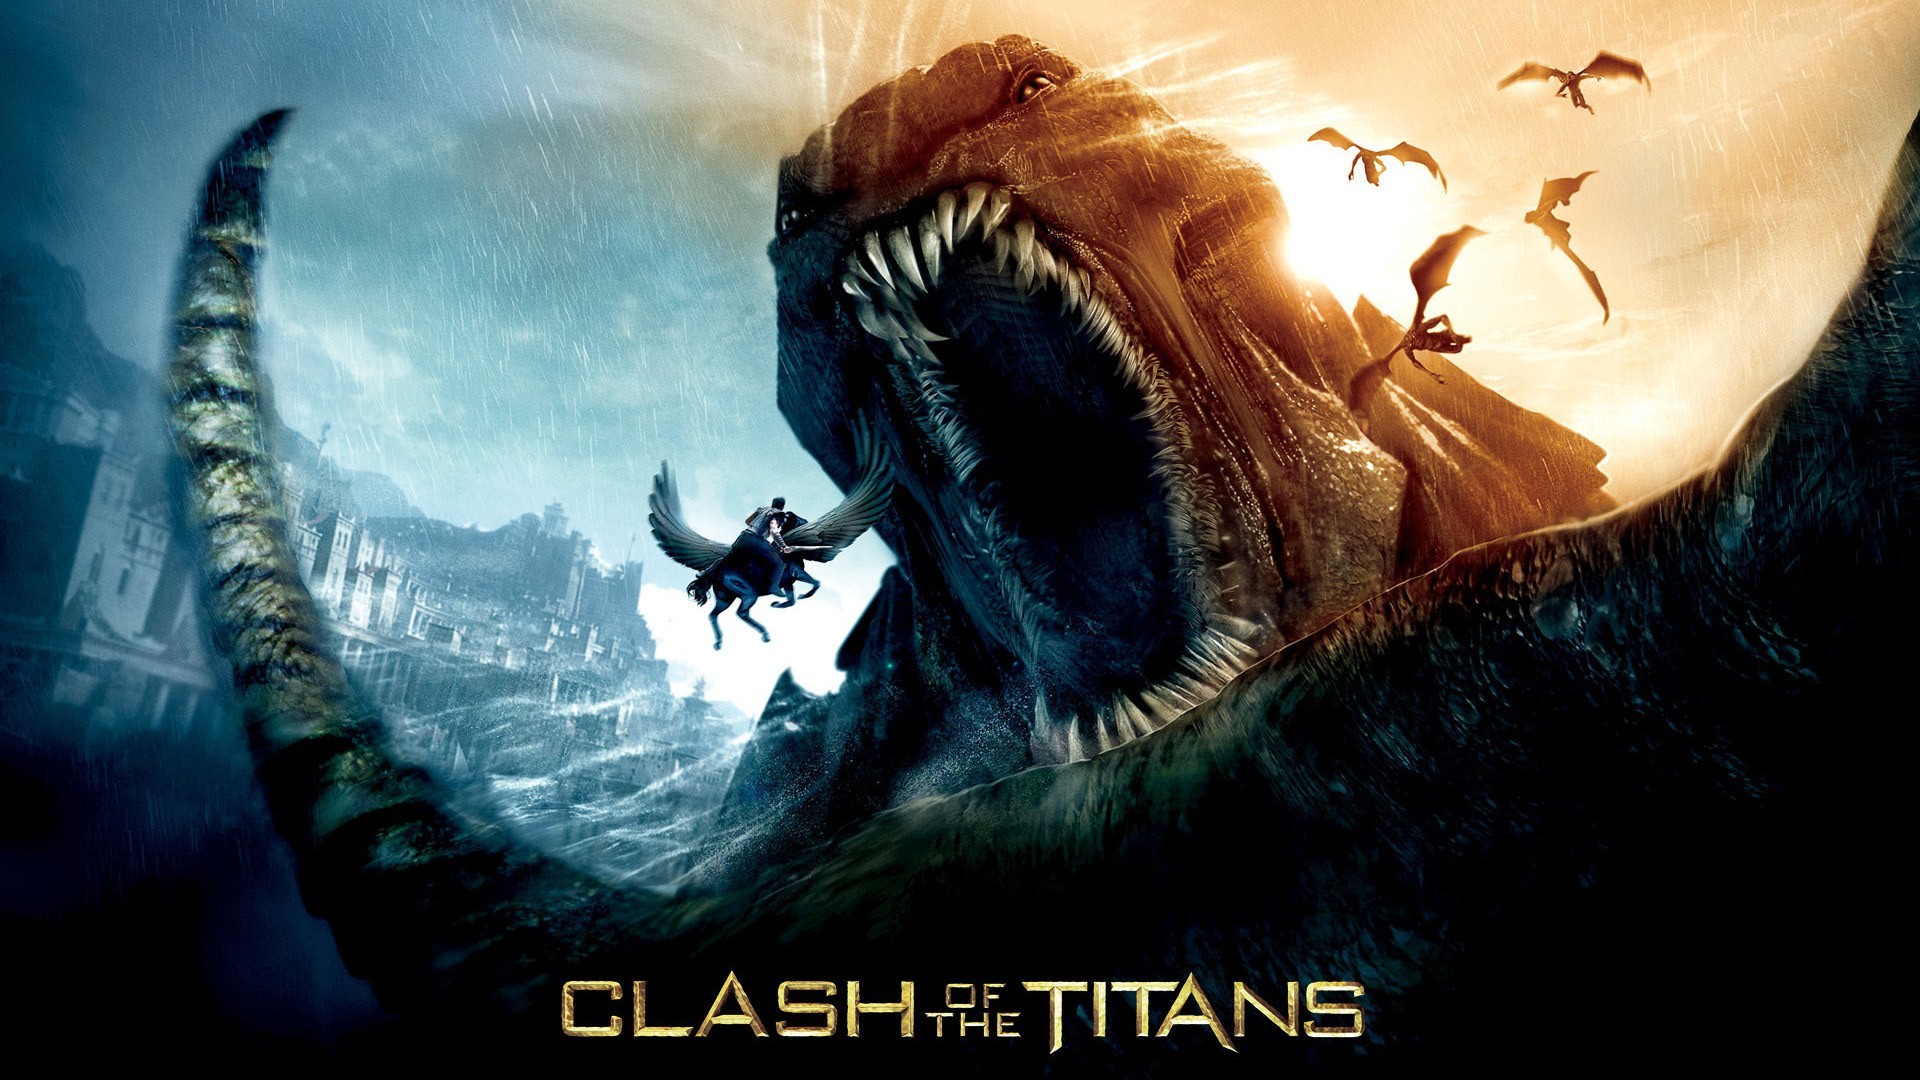 Movies Clash Of The Titans Movie Poster 1920x1080